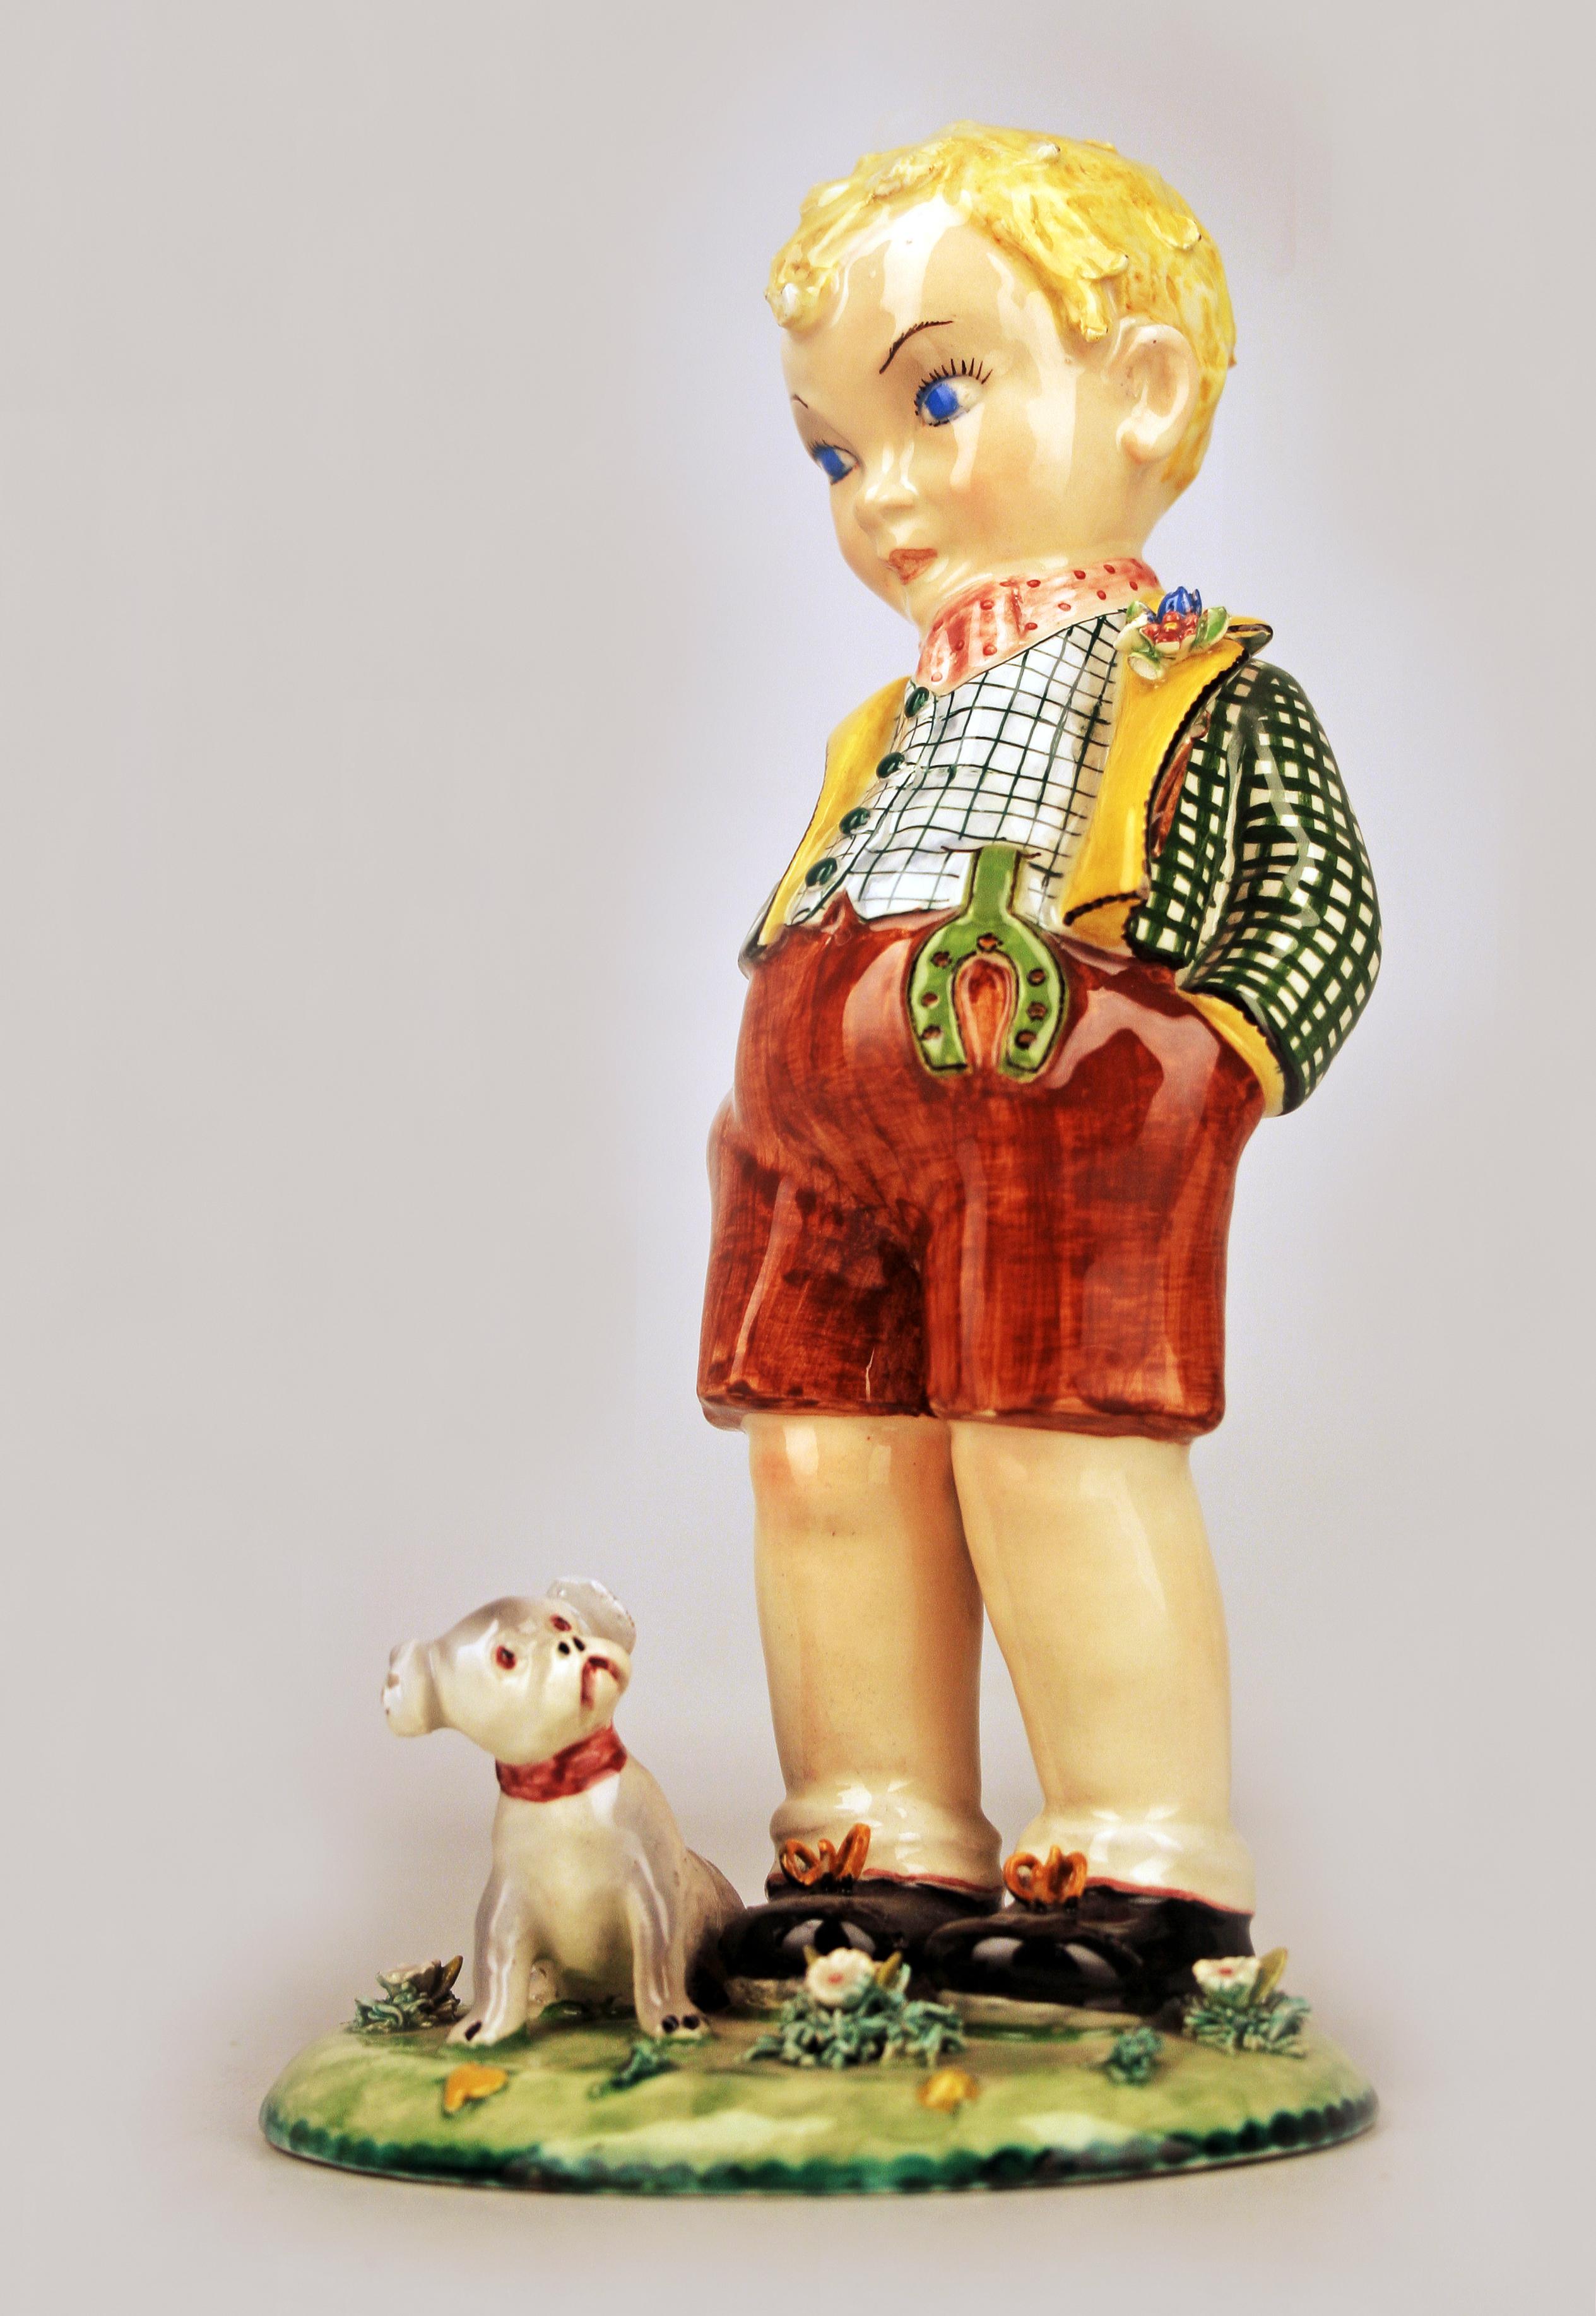 Art Nouveau glazed italian Torino-like porcelain figurine of a boy and his dog

By: unknown
Material: ceramic, porcelain, paint, enamel
Technique: glazed, pressed, molded, painted, hand-painted, enameled, polished
Dimensions: 4 in x 5 in x 11